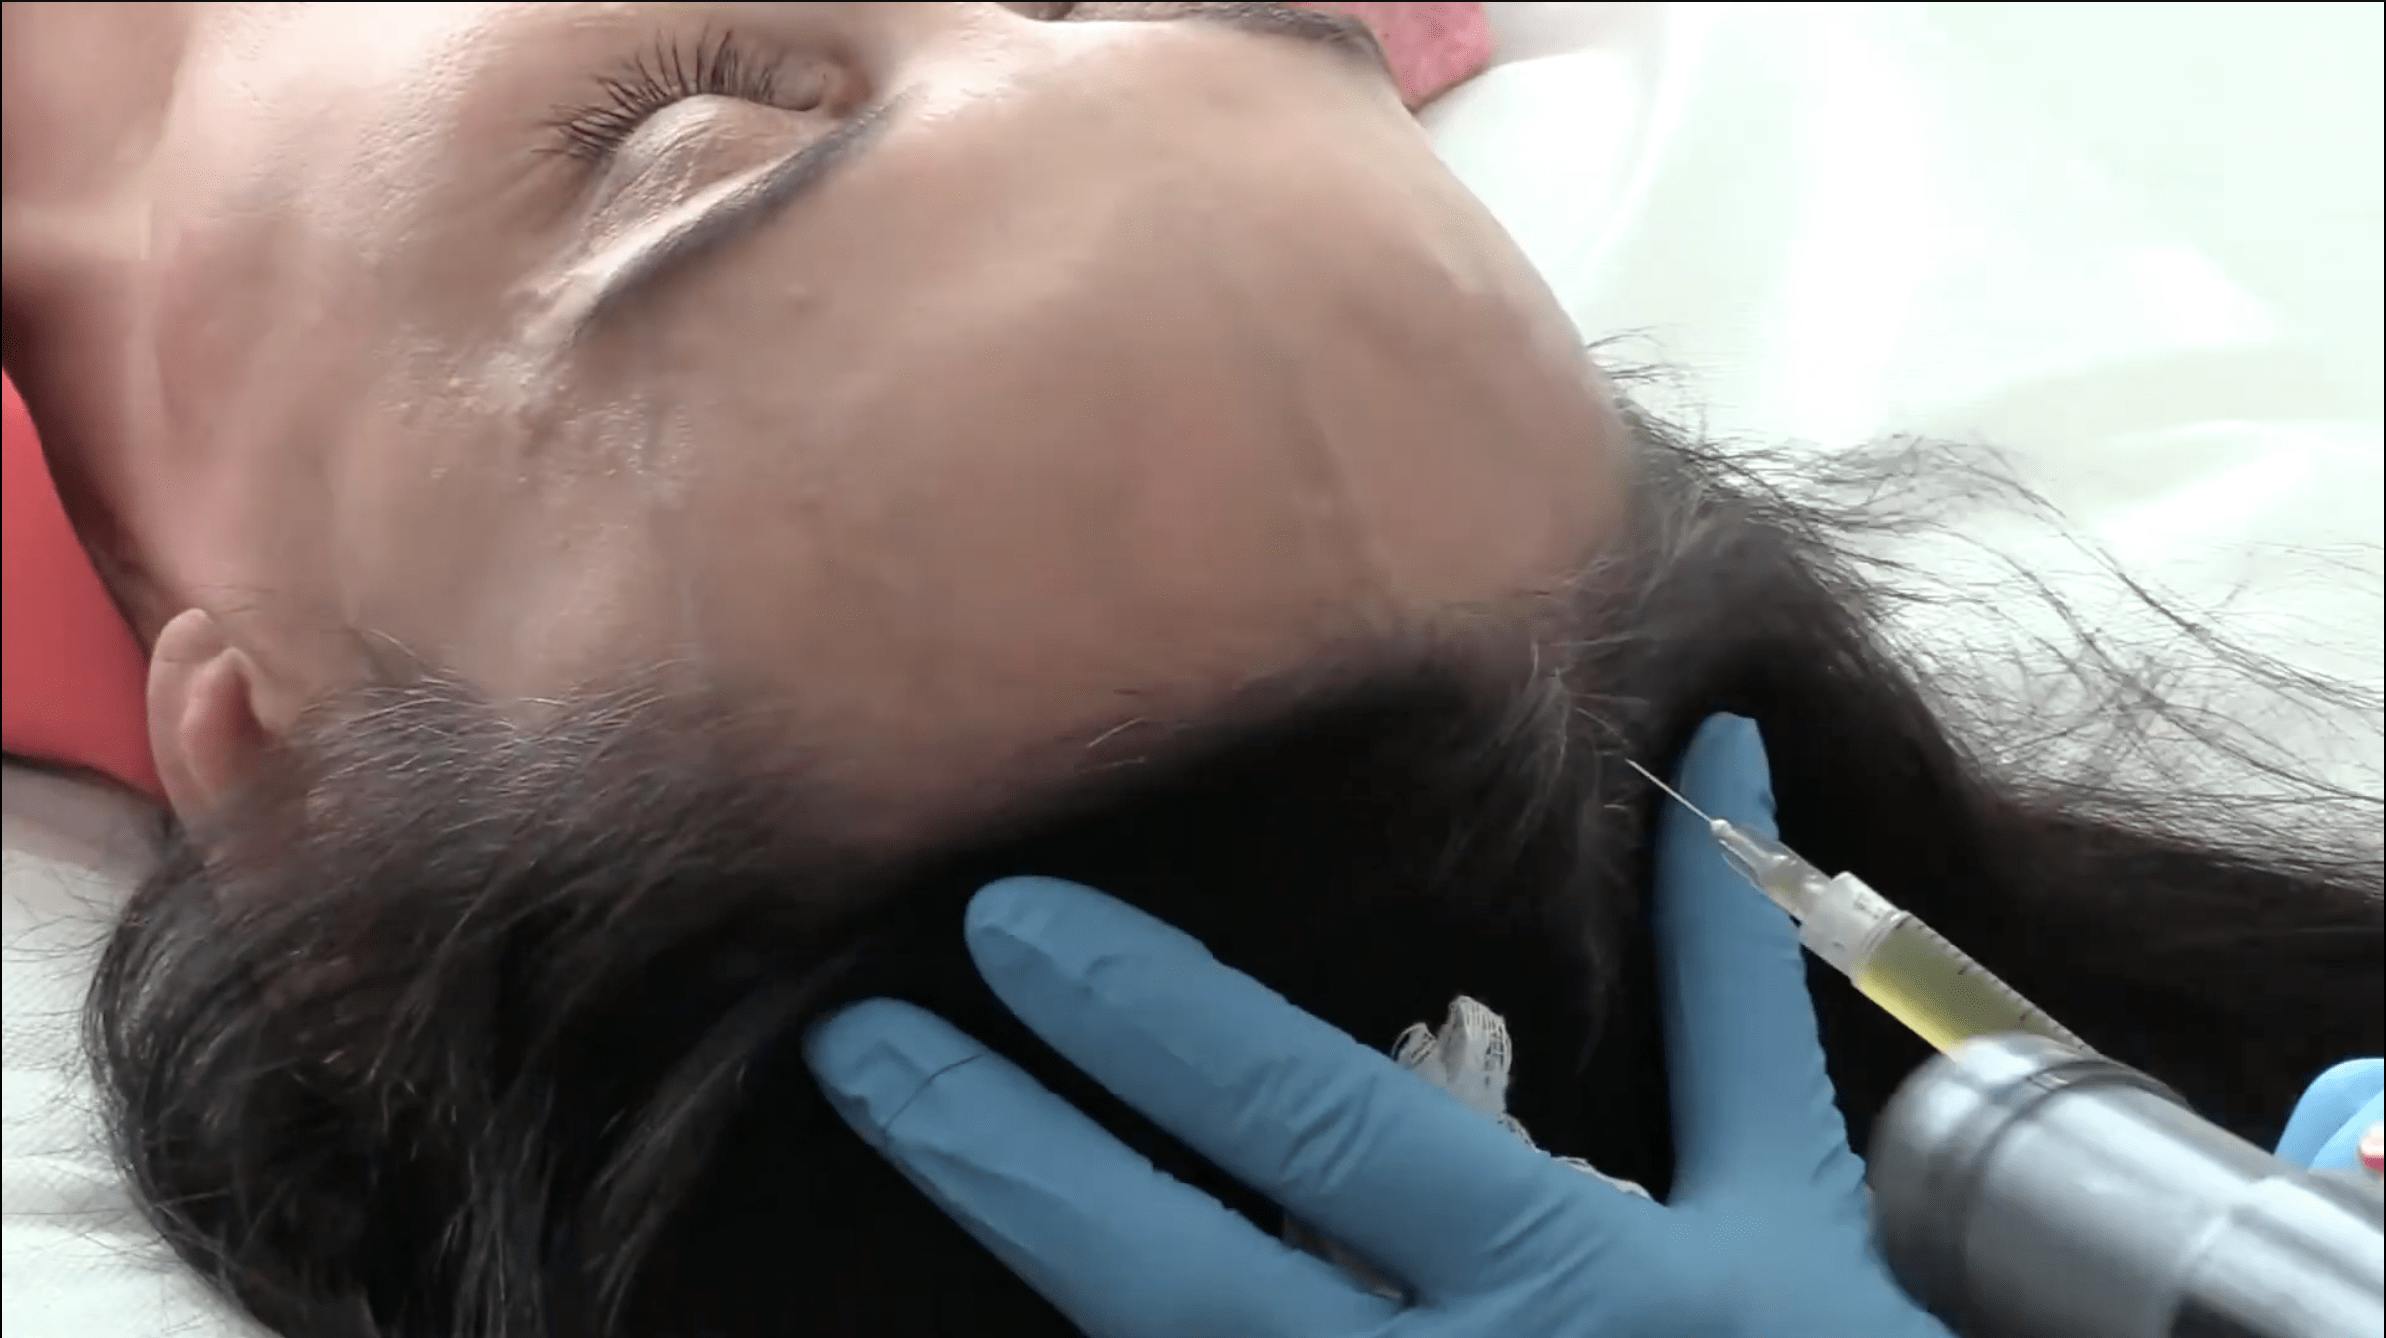 close up of an injection going into someones hair